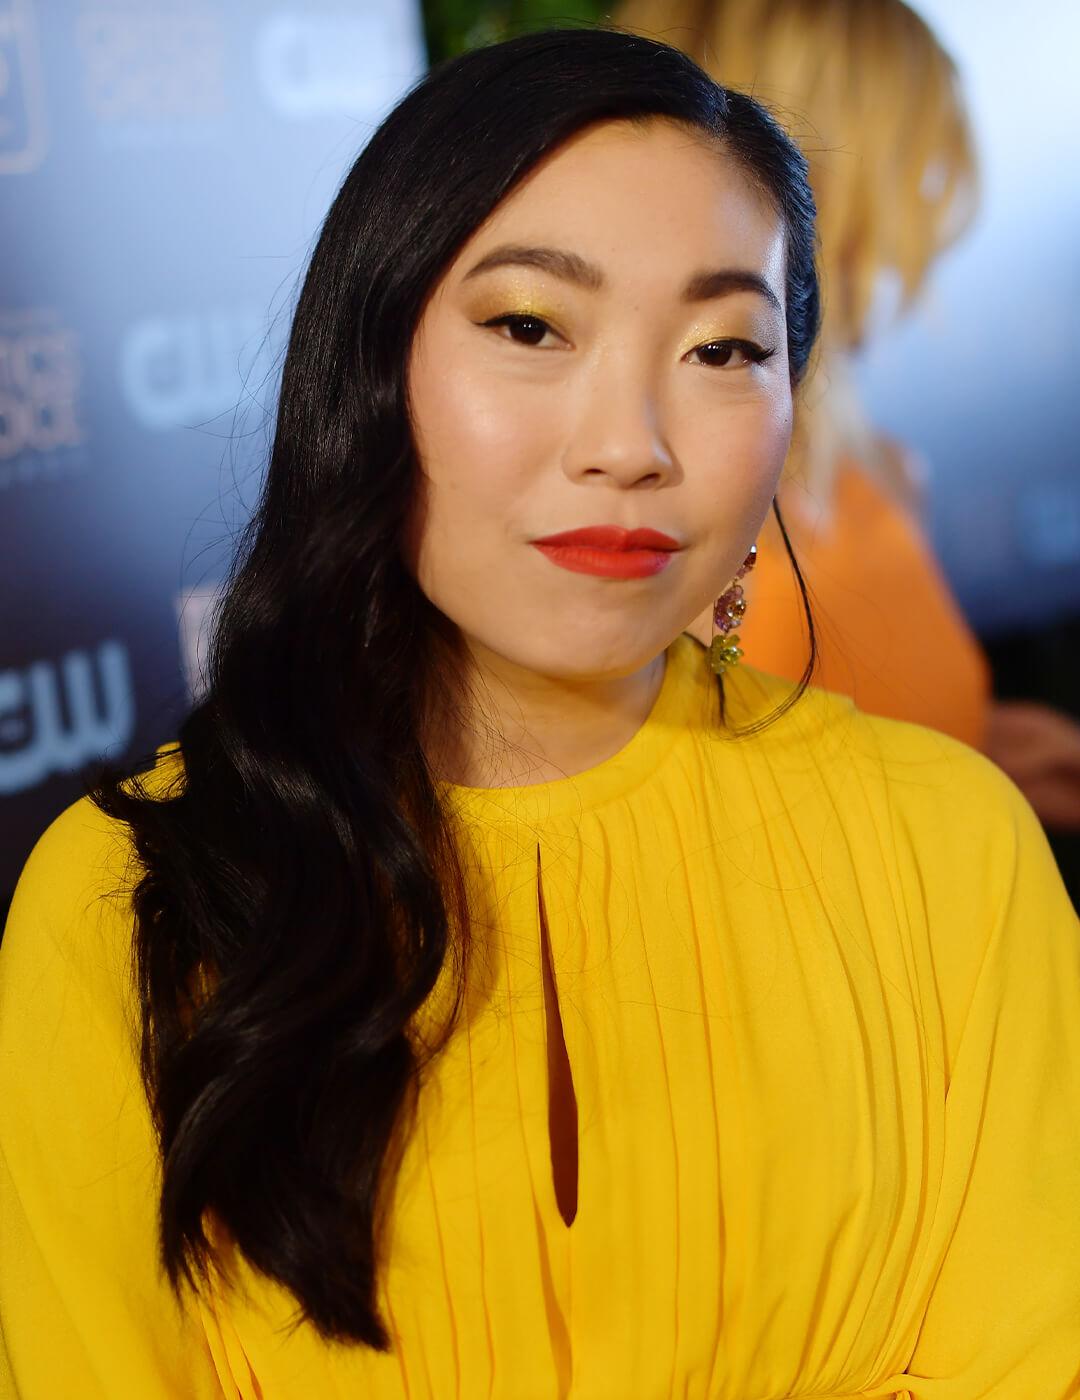 An image of Awkwafina with a classy inky black hair color